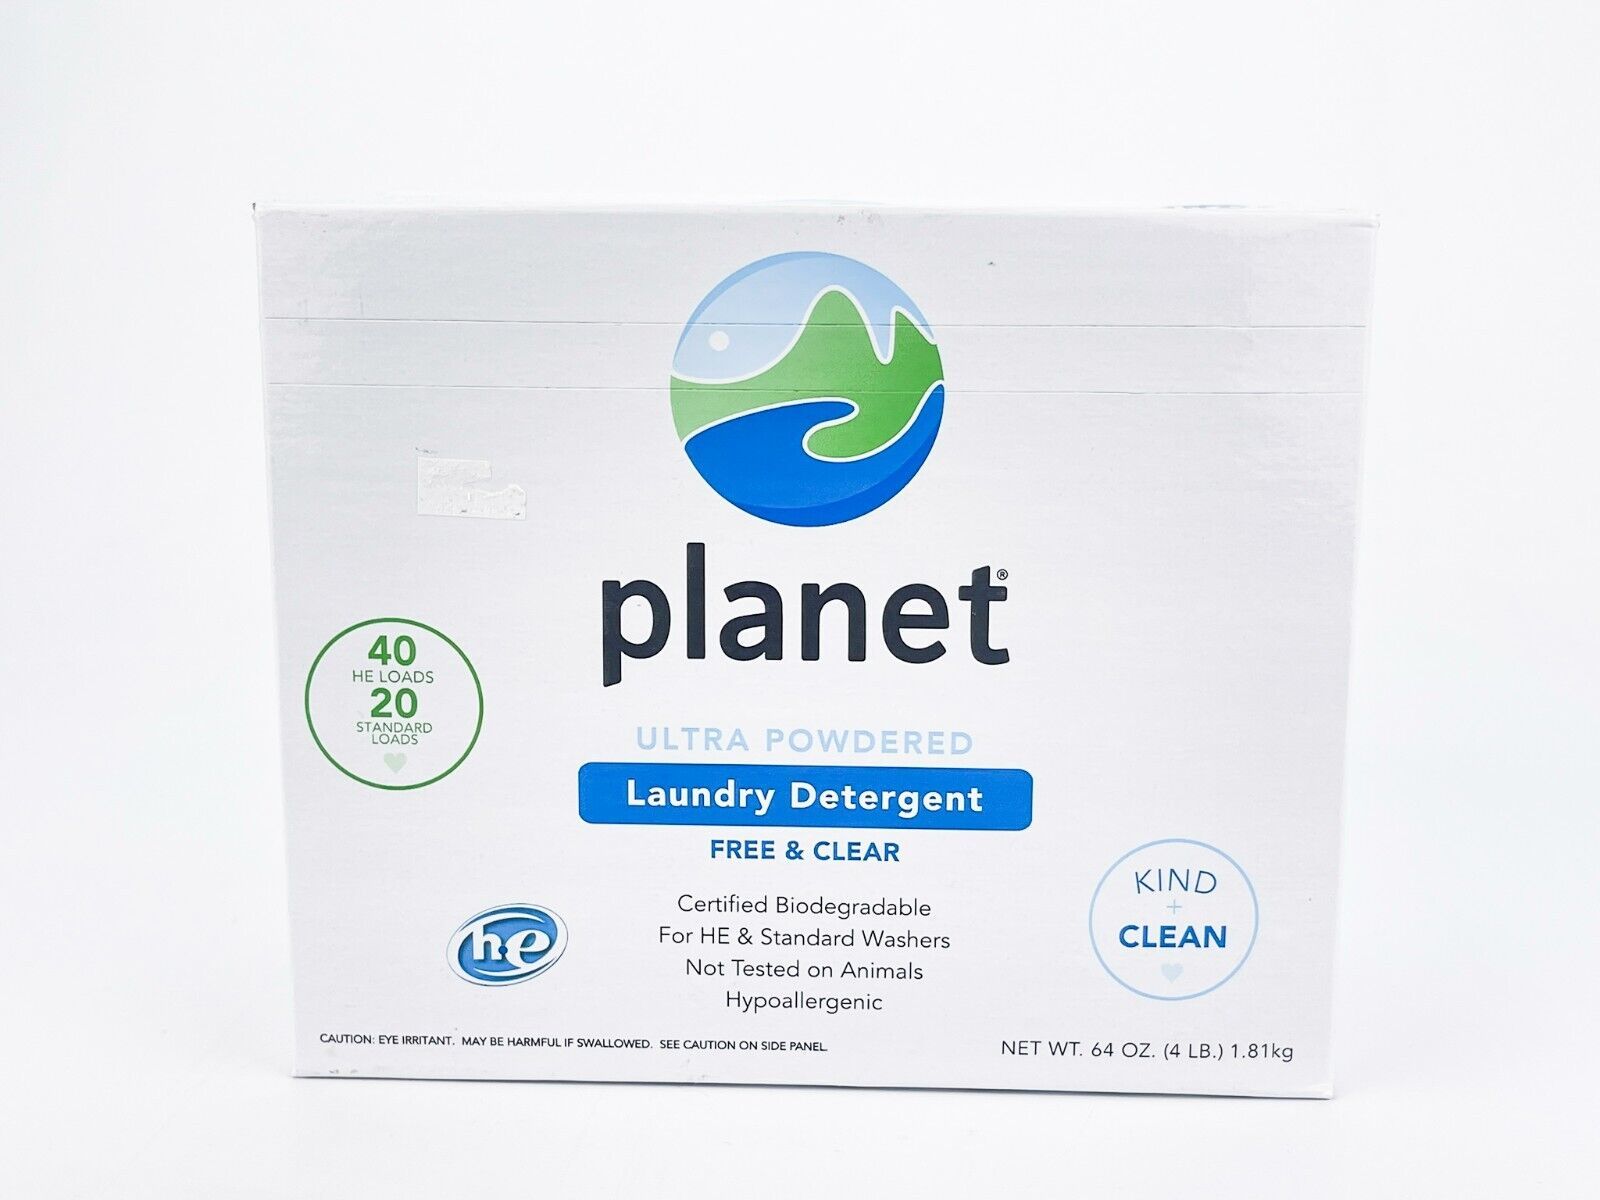 Primary image for Planet Ultra Powdered Free Clear Laundry Detergent 40 HE Loads Hypoallergenic